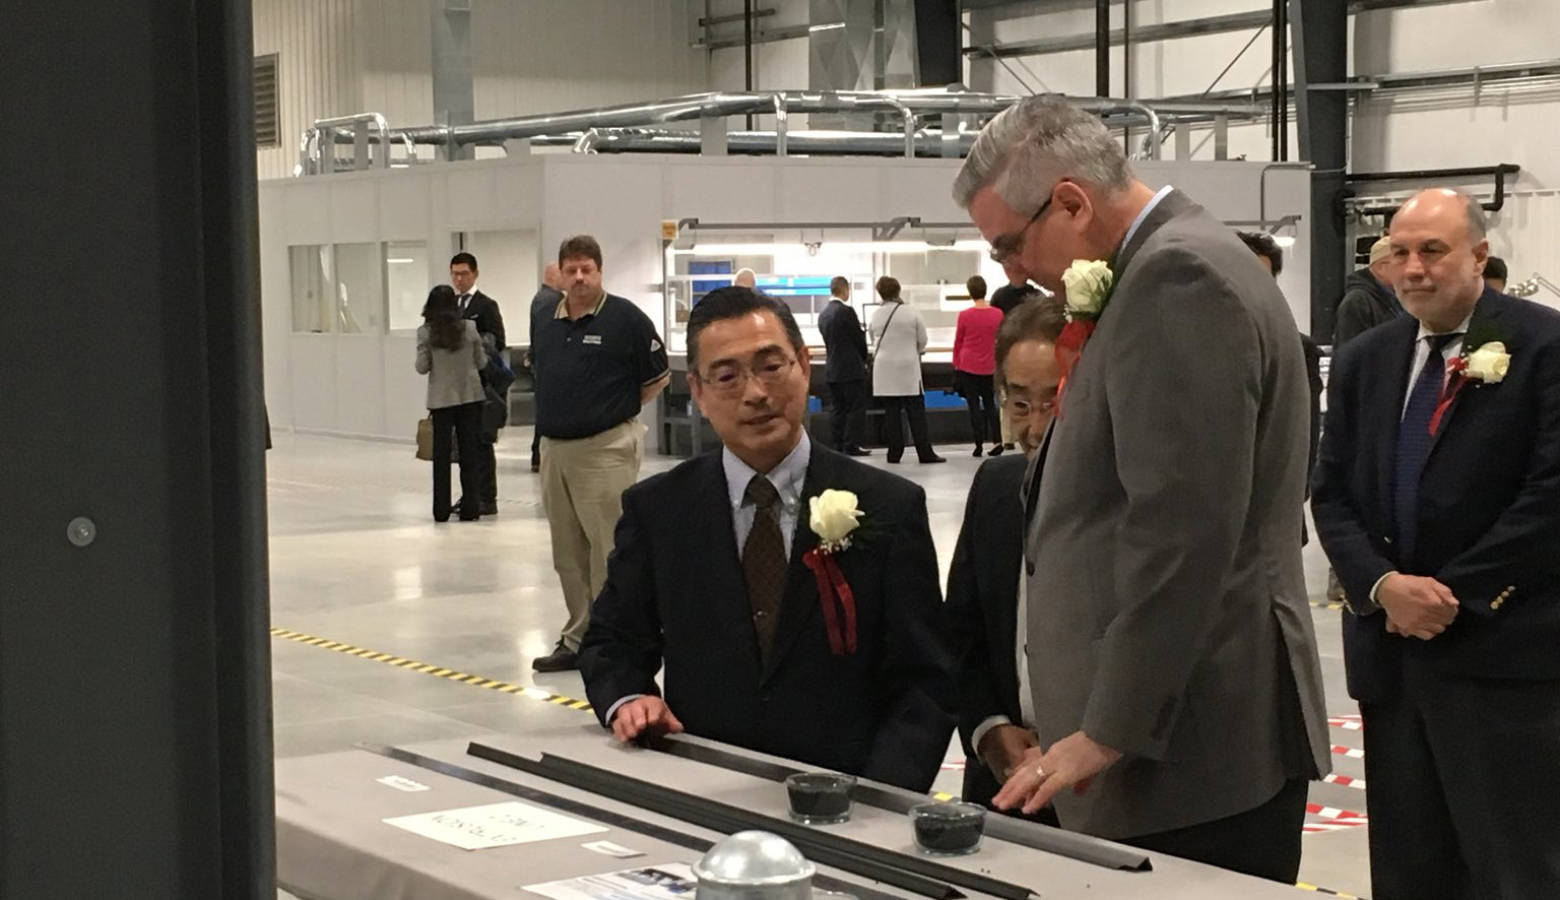 Gov. Eric Holcomb at the ribbon-cutting ceremony for M&C Tech in Washington, Indiana. (@GovHolcomb/Twitter)